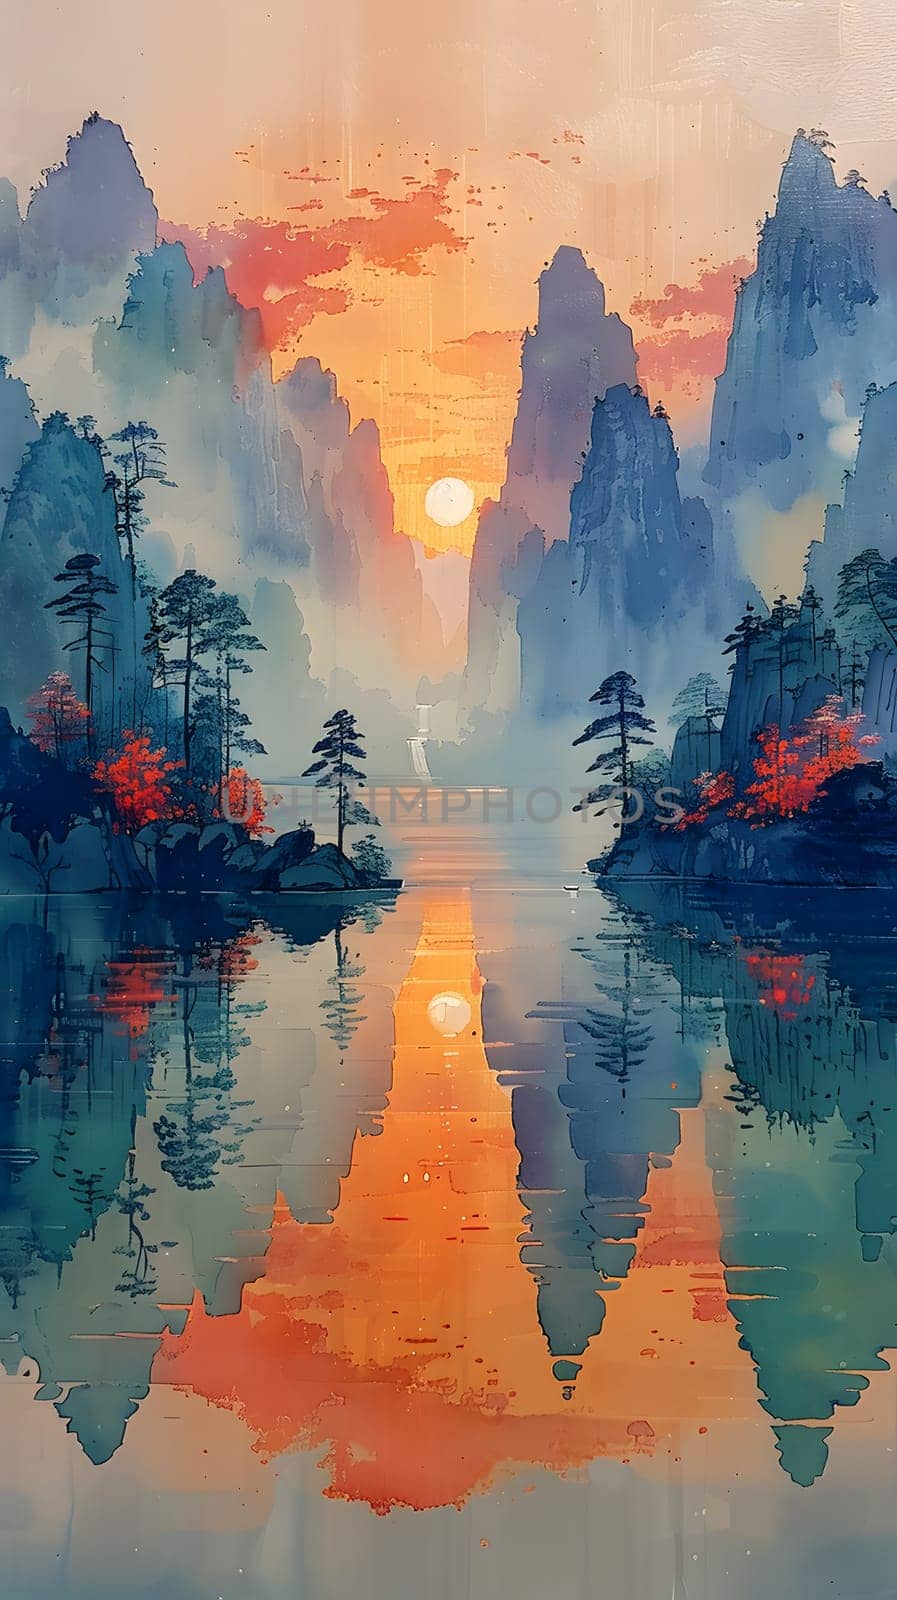 An art piece depicting the afterglow of a sunset over a lake surrounded by mountains, with a beautiful orange sky and clouds reflecting in the water